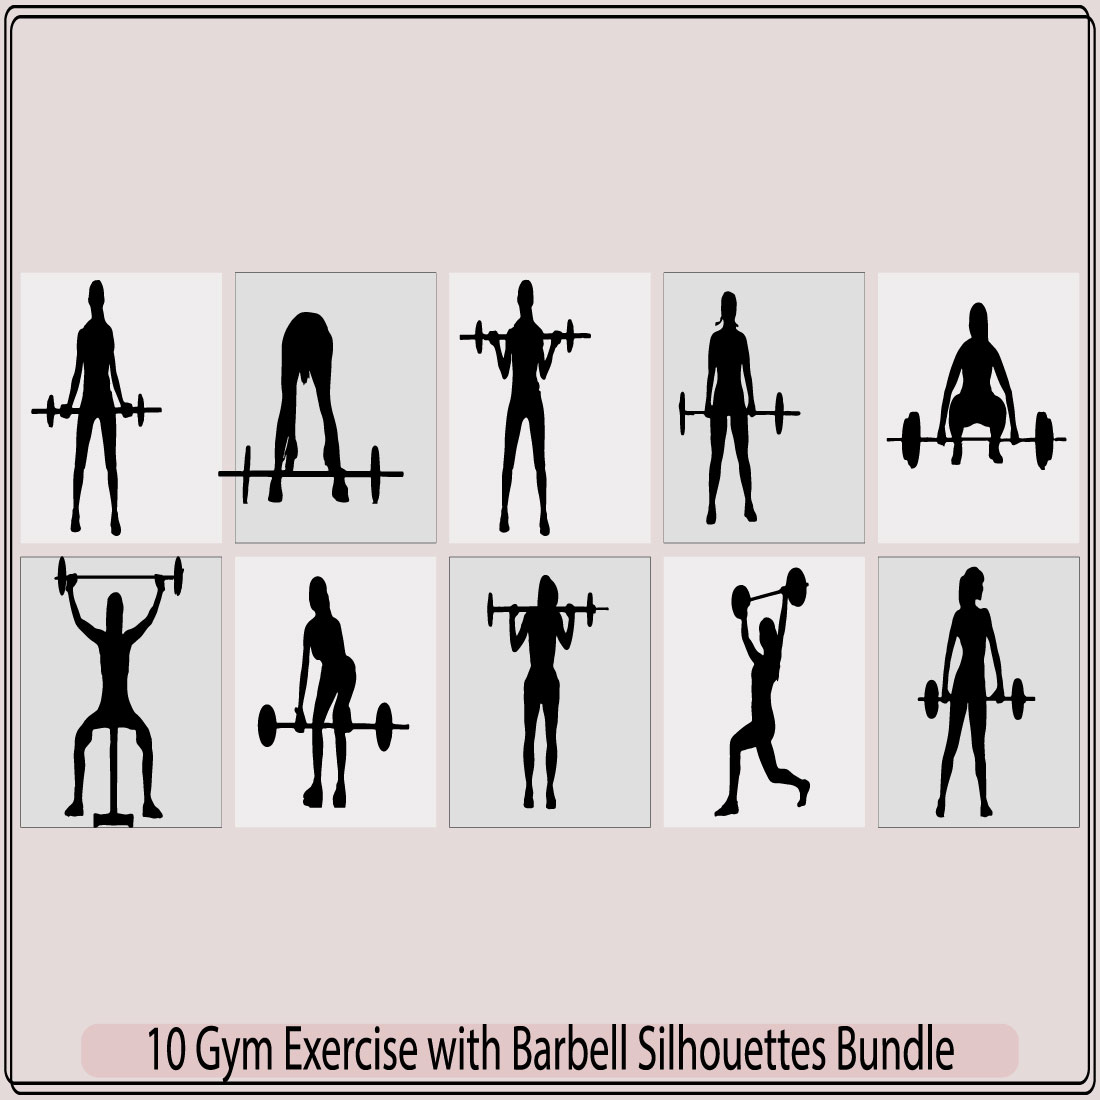 Weightlifter lifts big barbell,Squats with weight Woman lifts big barbell,Fitness Club emblem Training Woman with barbell preview image.